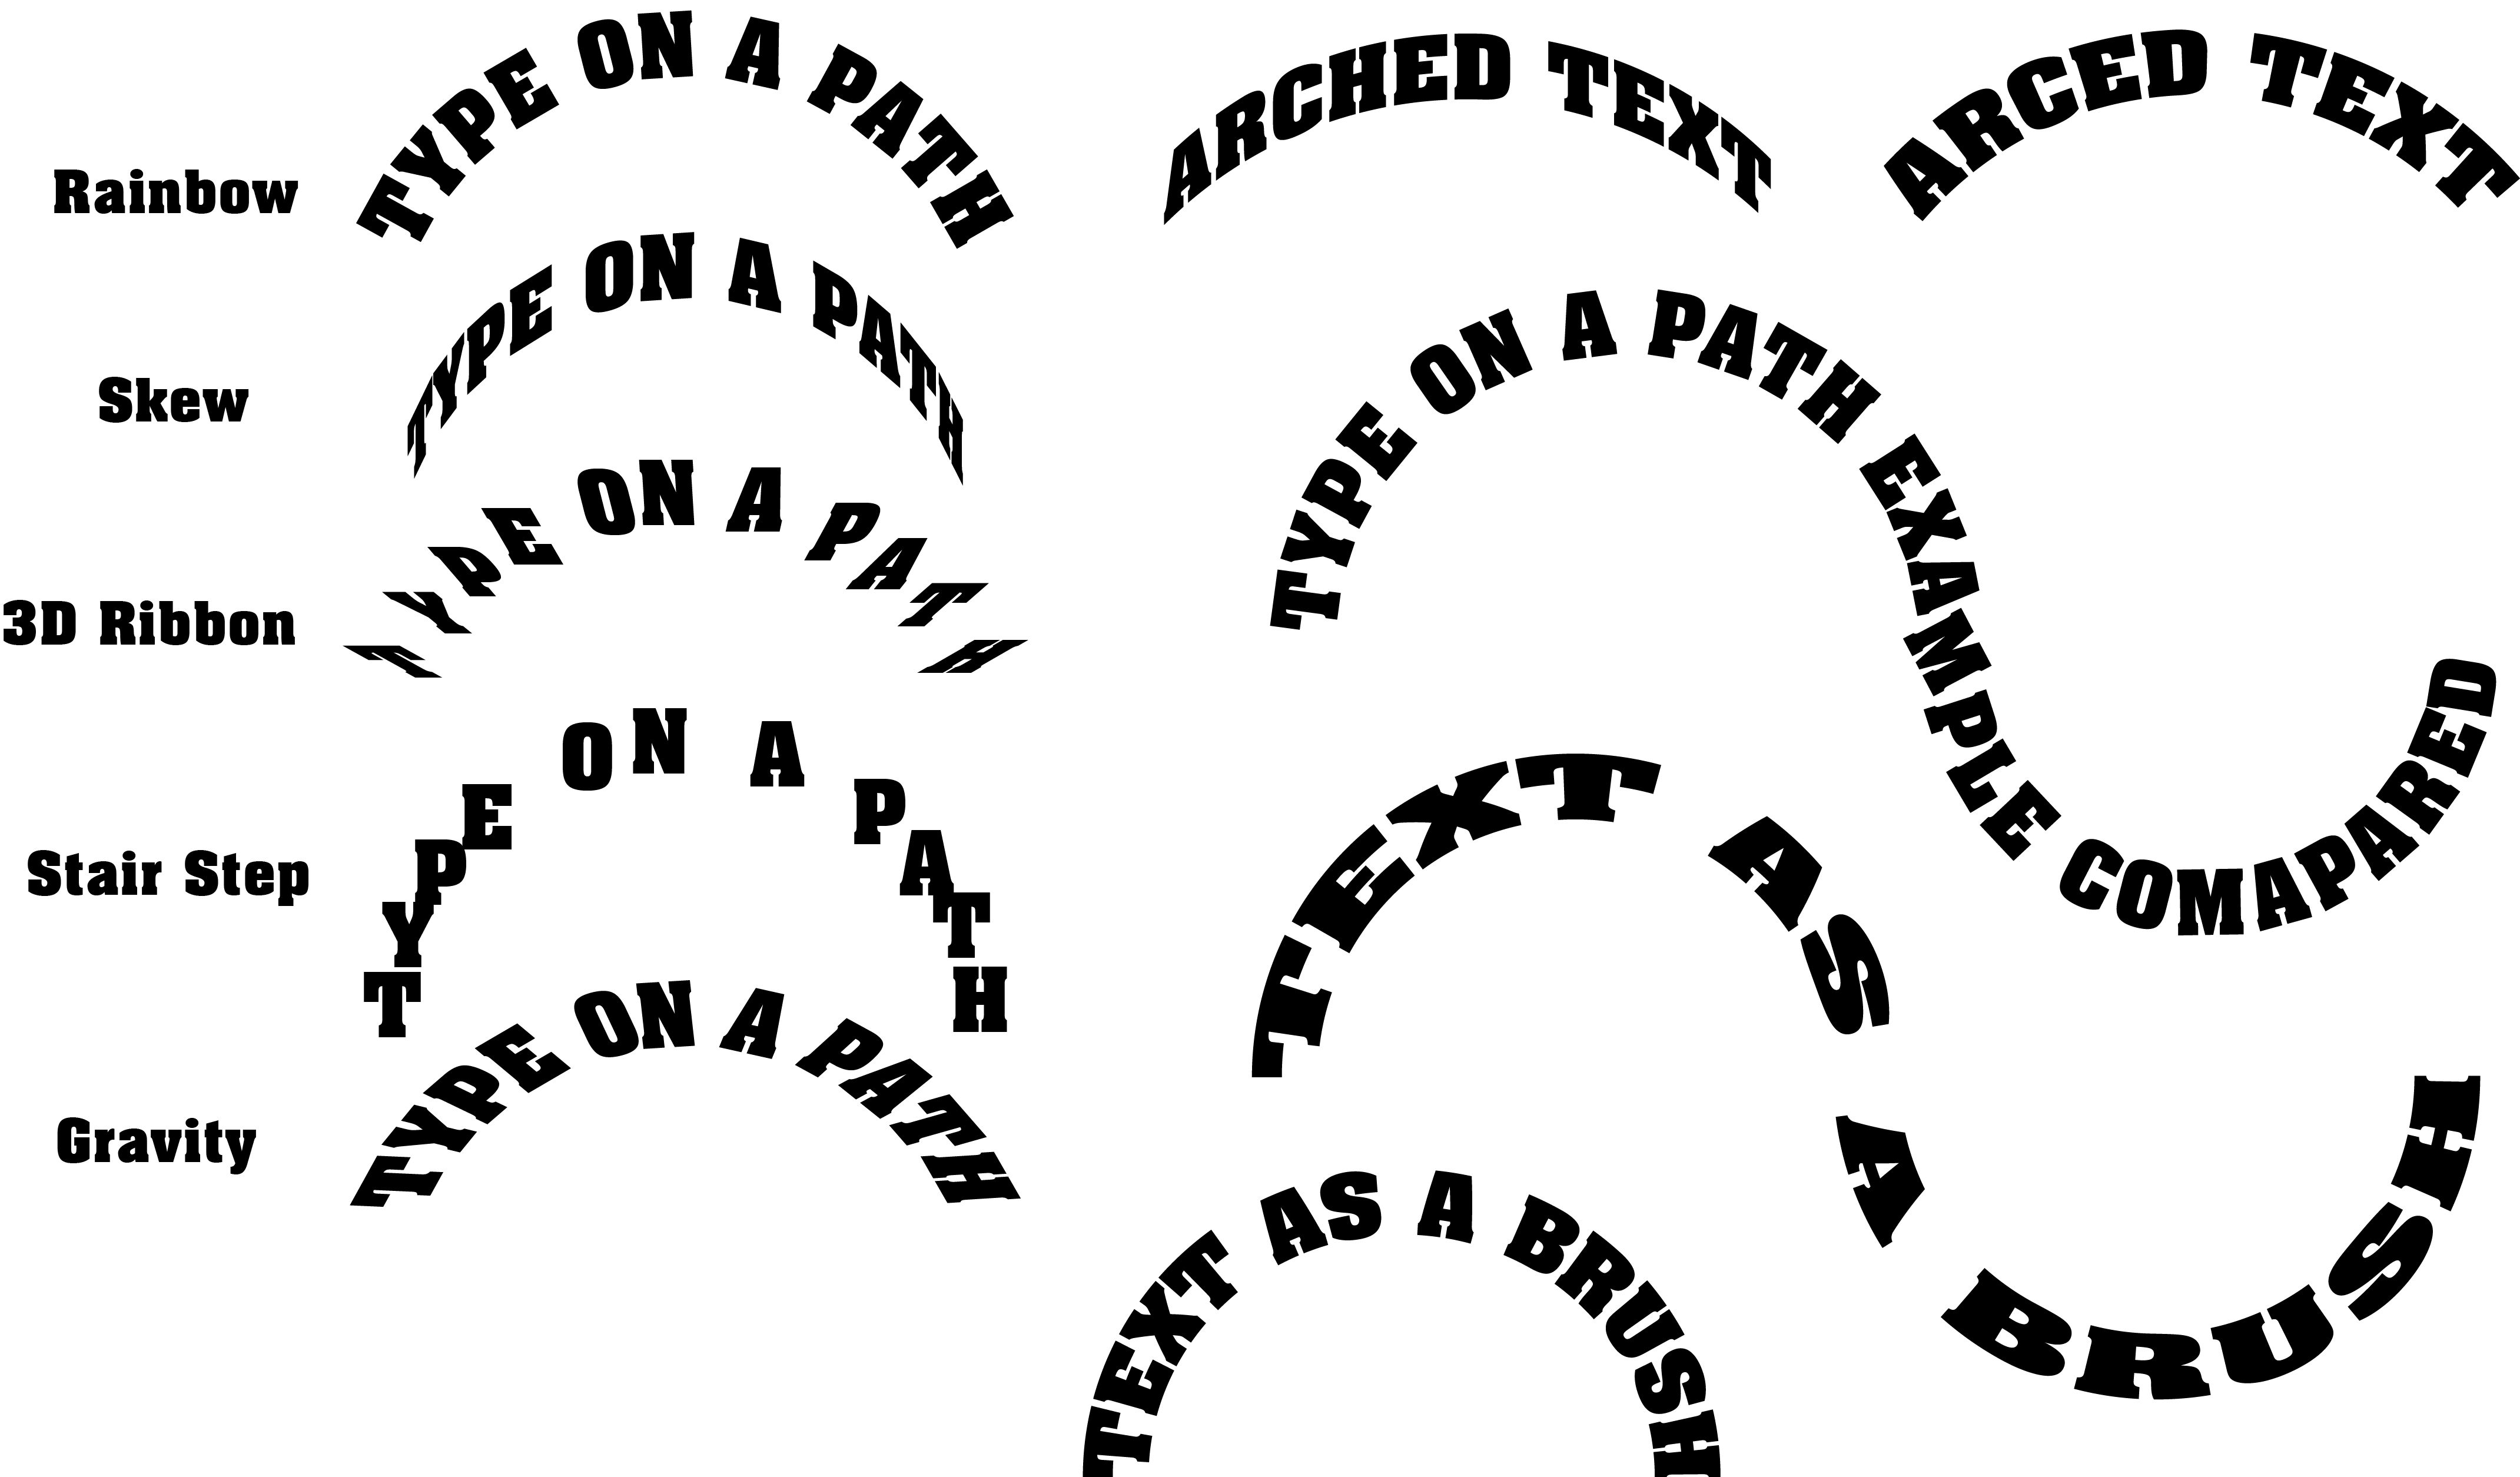 Adobe Illustrator Arched Text Examples Instructional Contributions Uscutter Forum